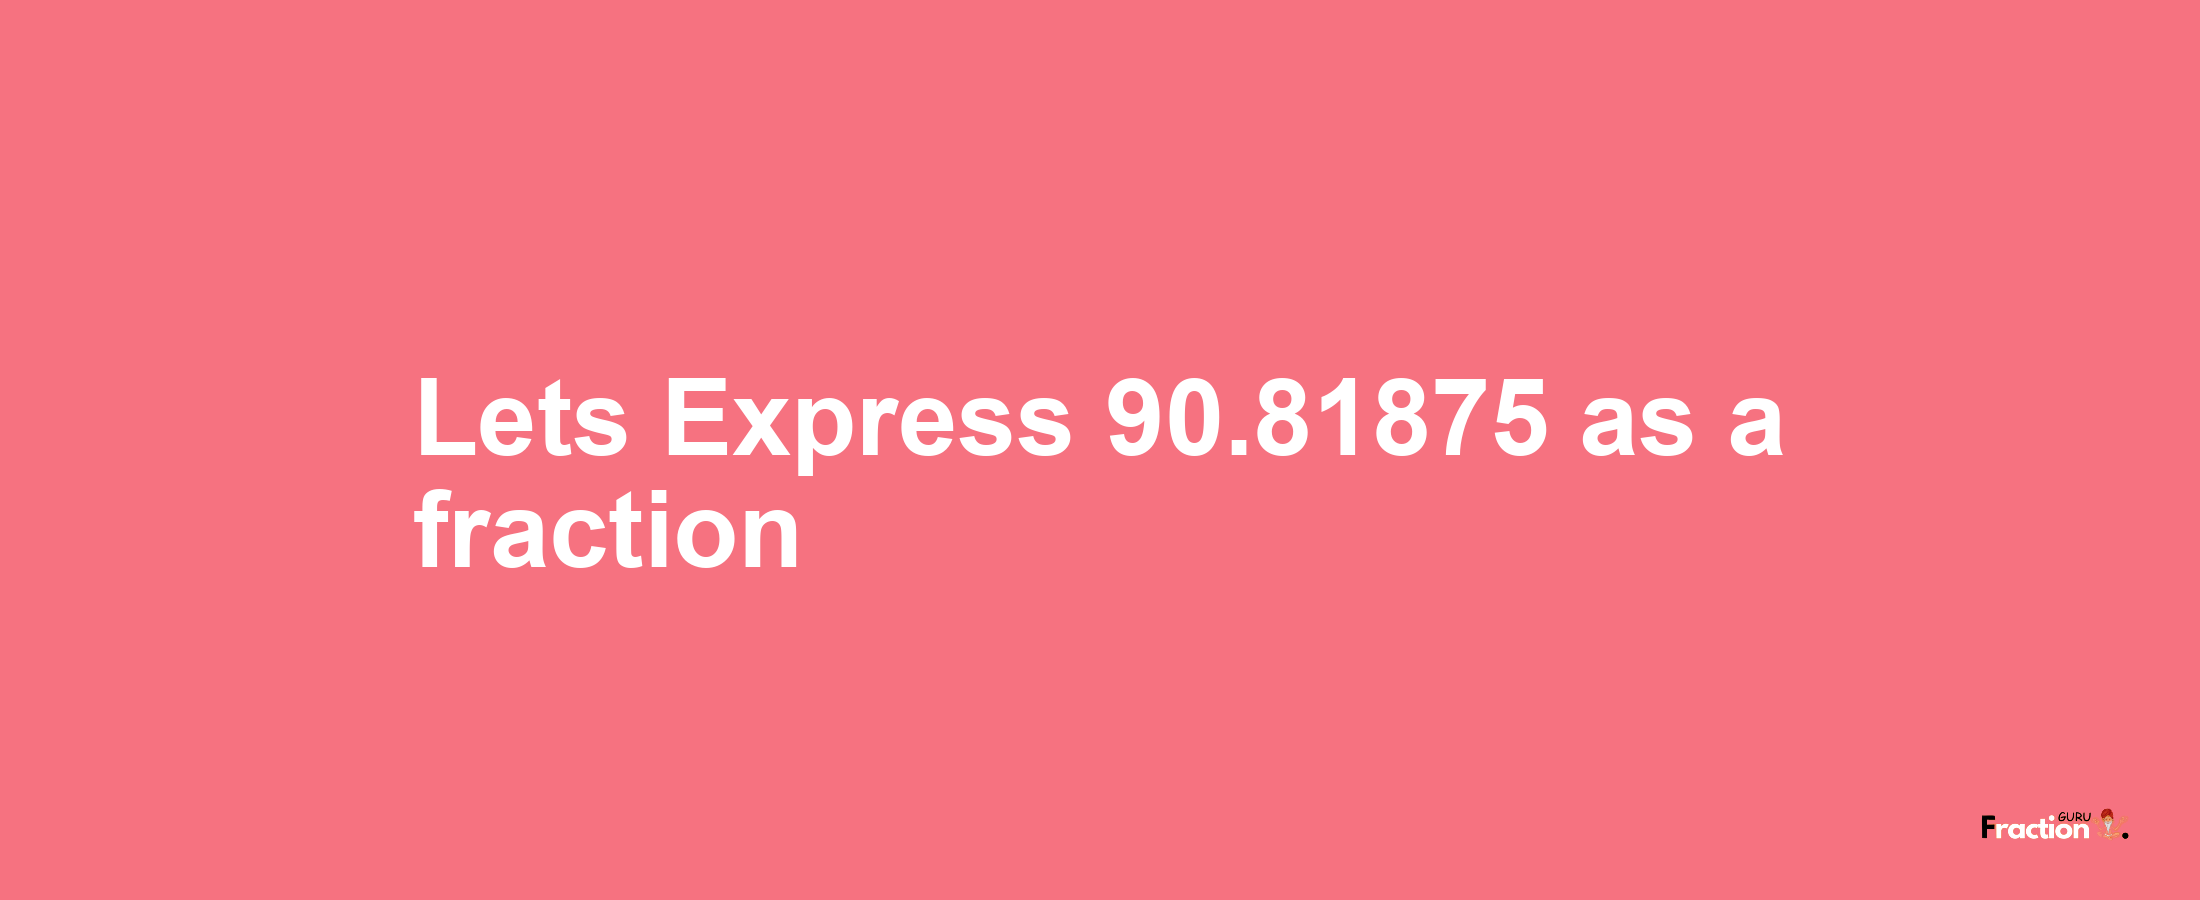 Lets Express 90.81875 as afraction